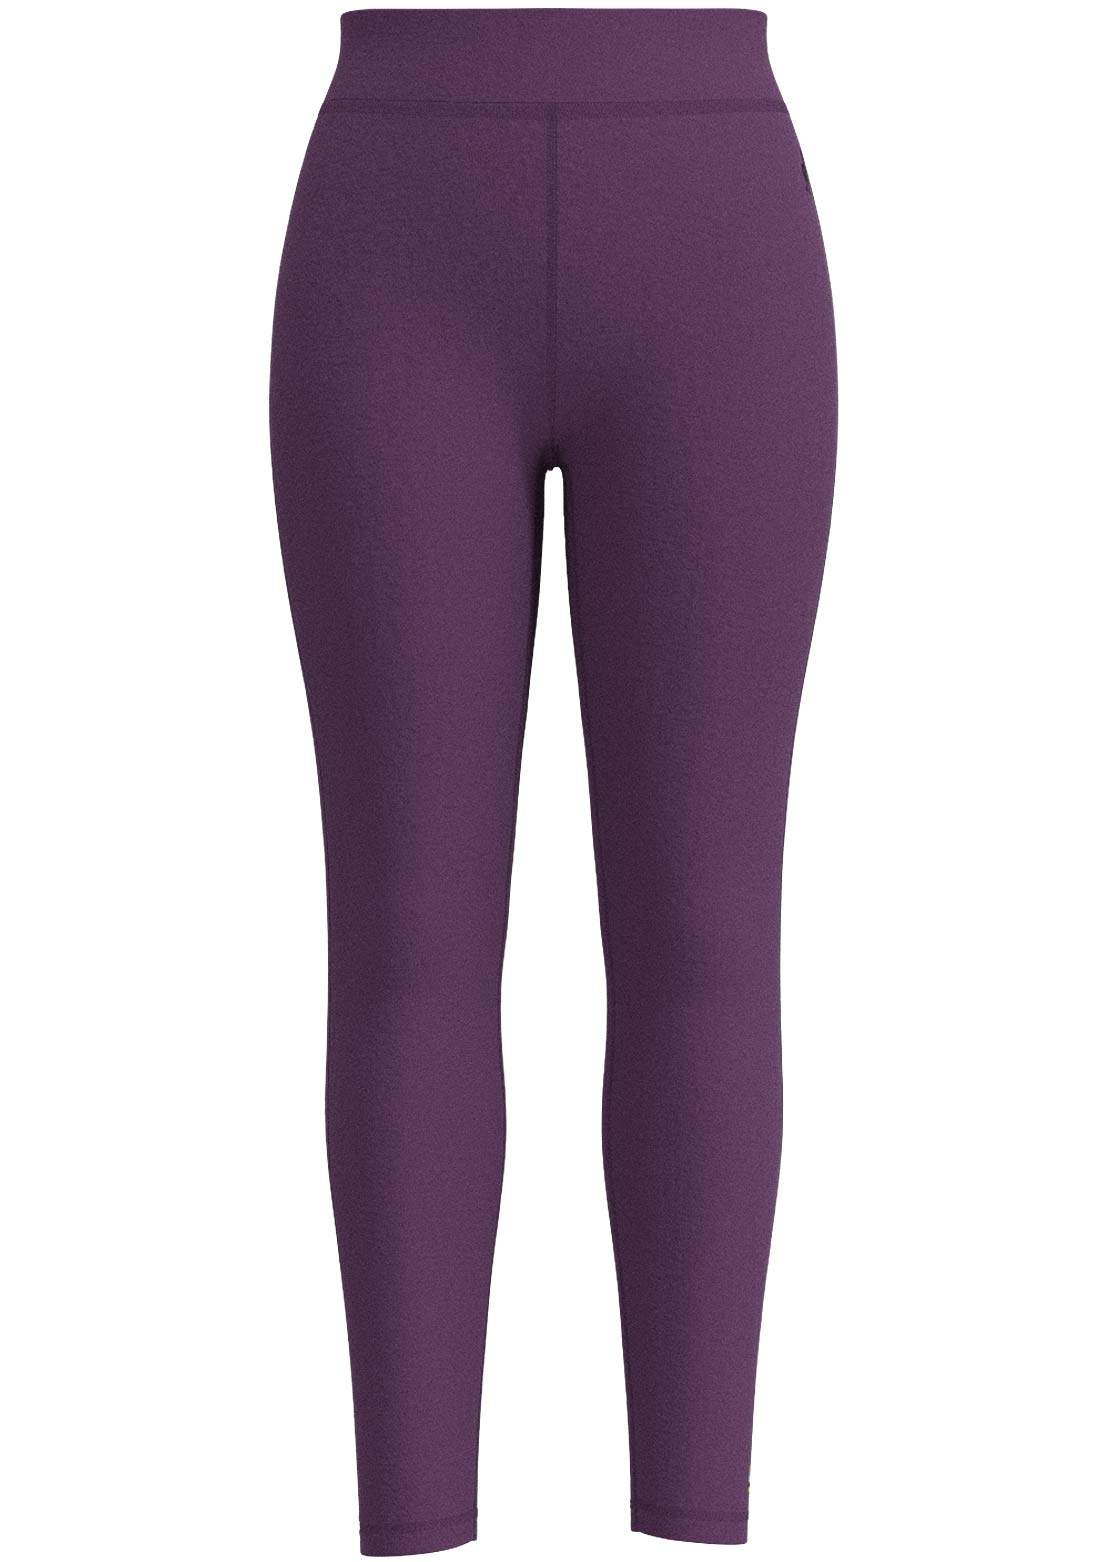 Smartwool Women's Classic Thermal Merino Base Layer Boxed Bottoms - PRFO  Sports